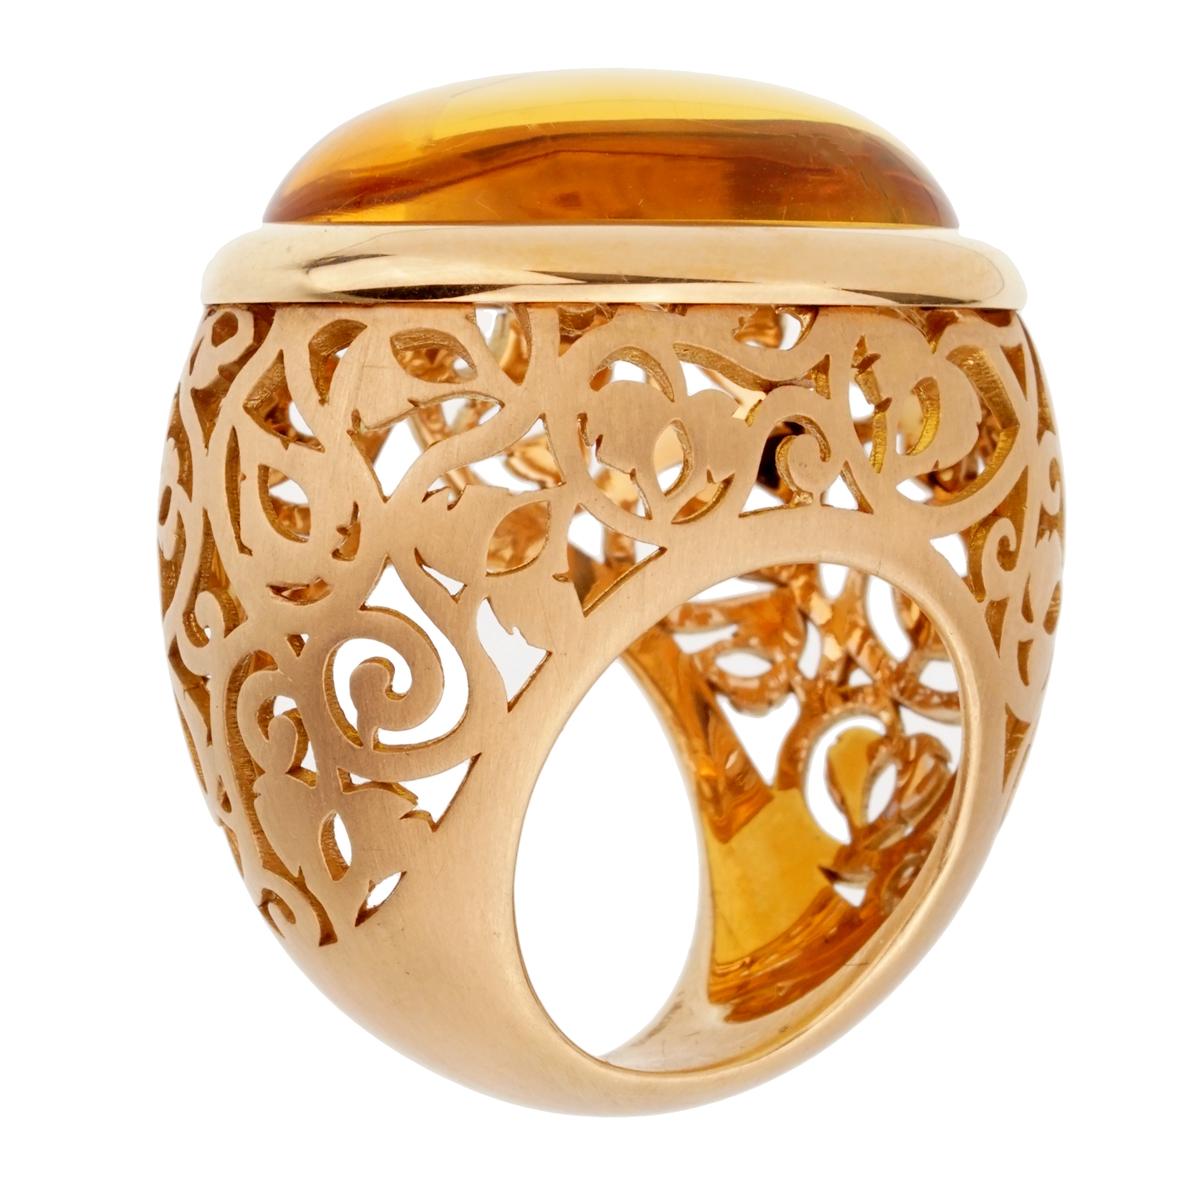 A magnificent brand new Pomellato rose gold cocktail ring showcasing a 19.94ct cabochon Amber. The ring measures a size 5.5 and can be resized.

Pomellato Retail Price: $7,800
Sku: 2319